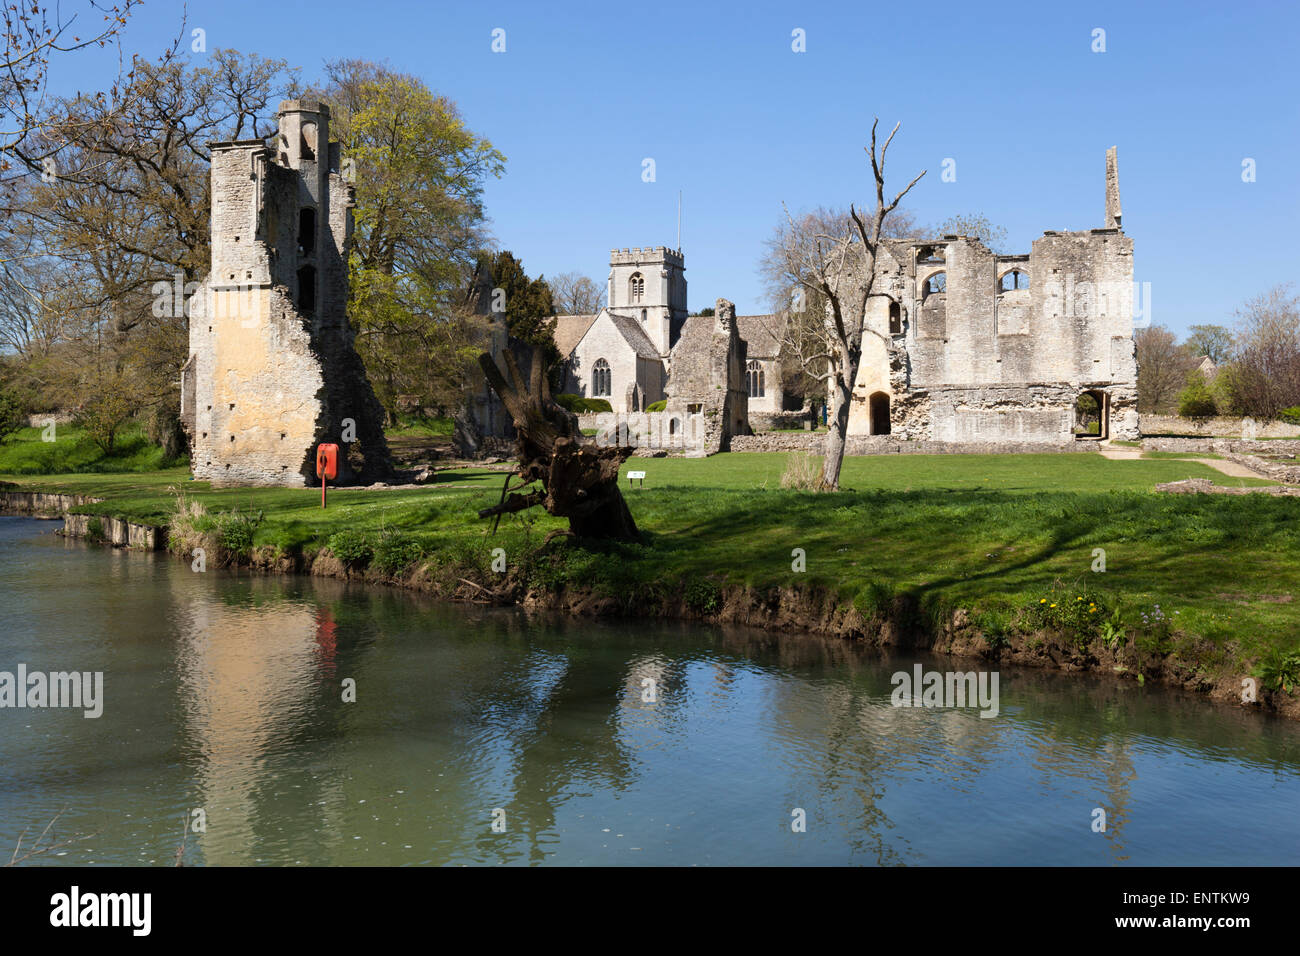 Ruins of Minster Lovell Hall on River Windrush, Minster Lovell, near Witney, Cotswolds, Oxfordshire, England, United Kingdom Stock Photo